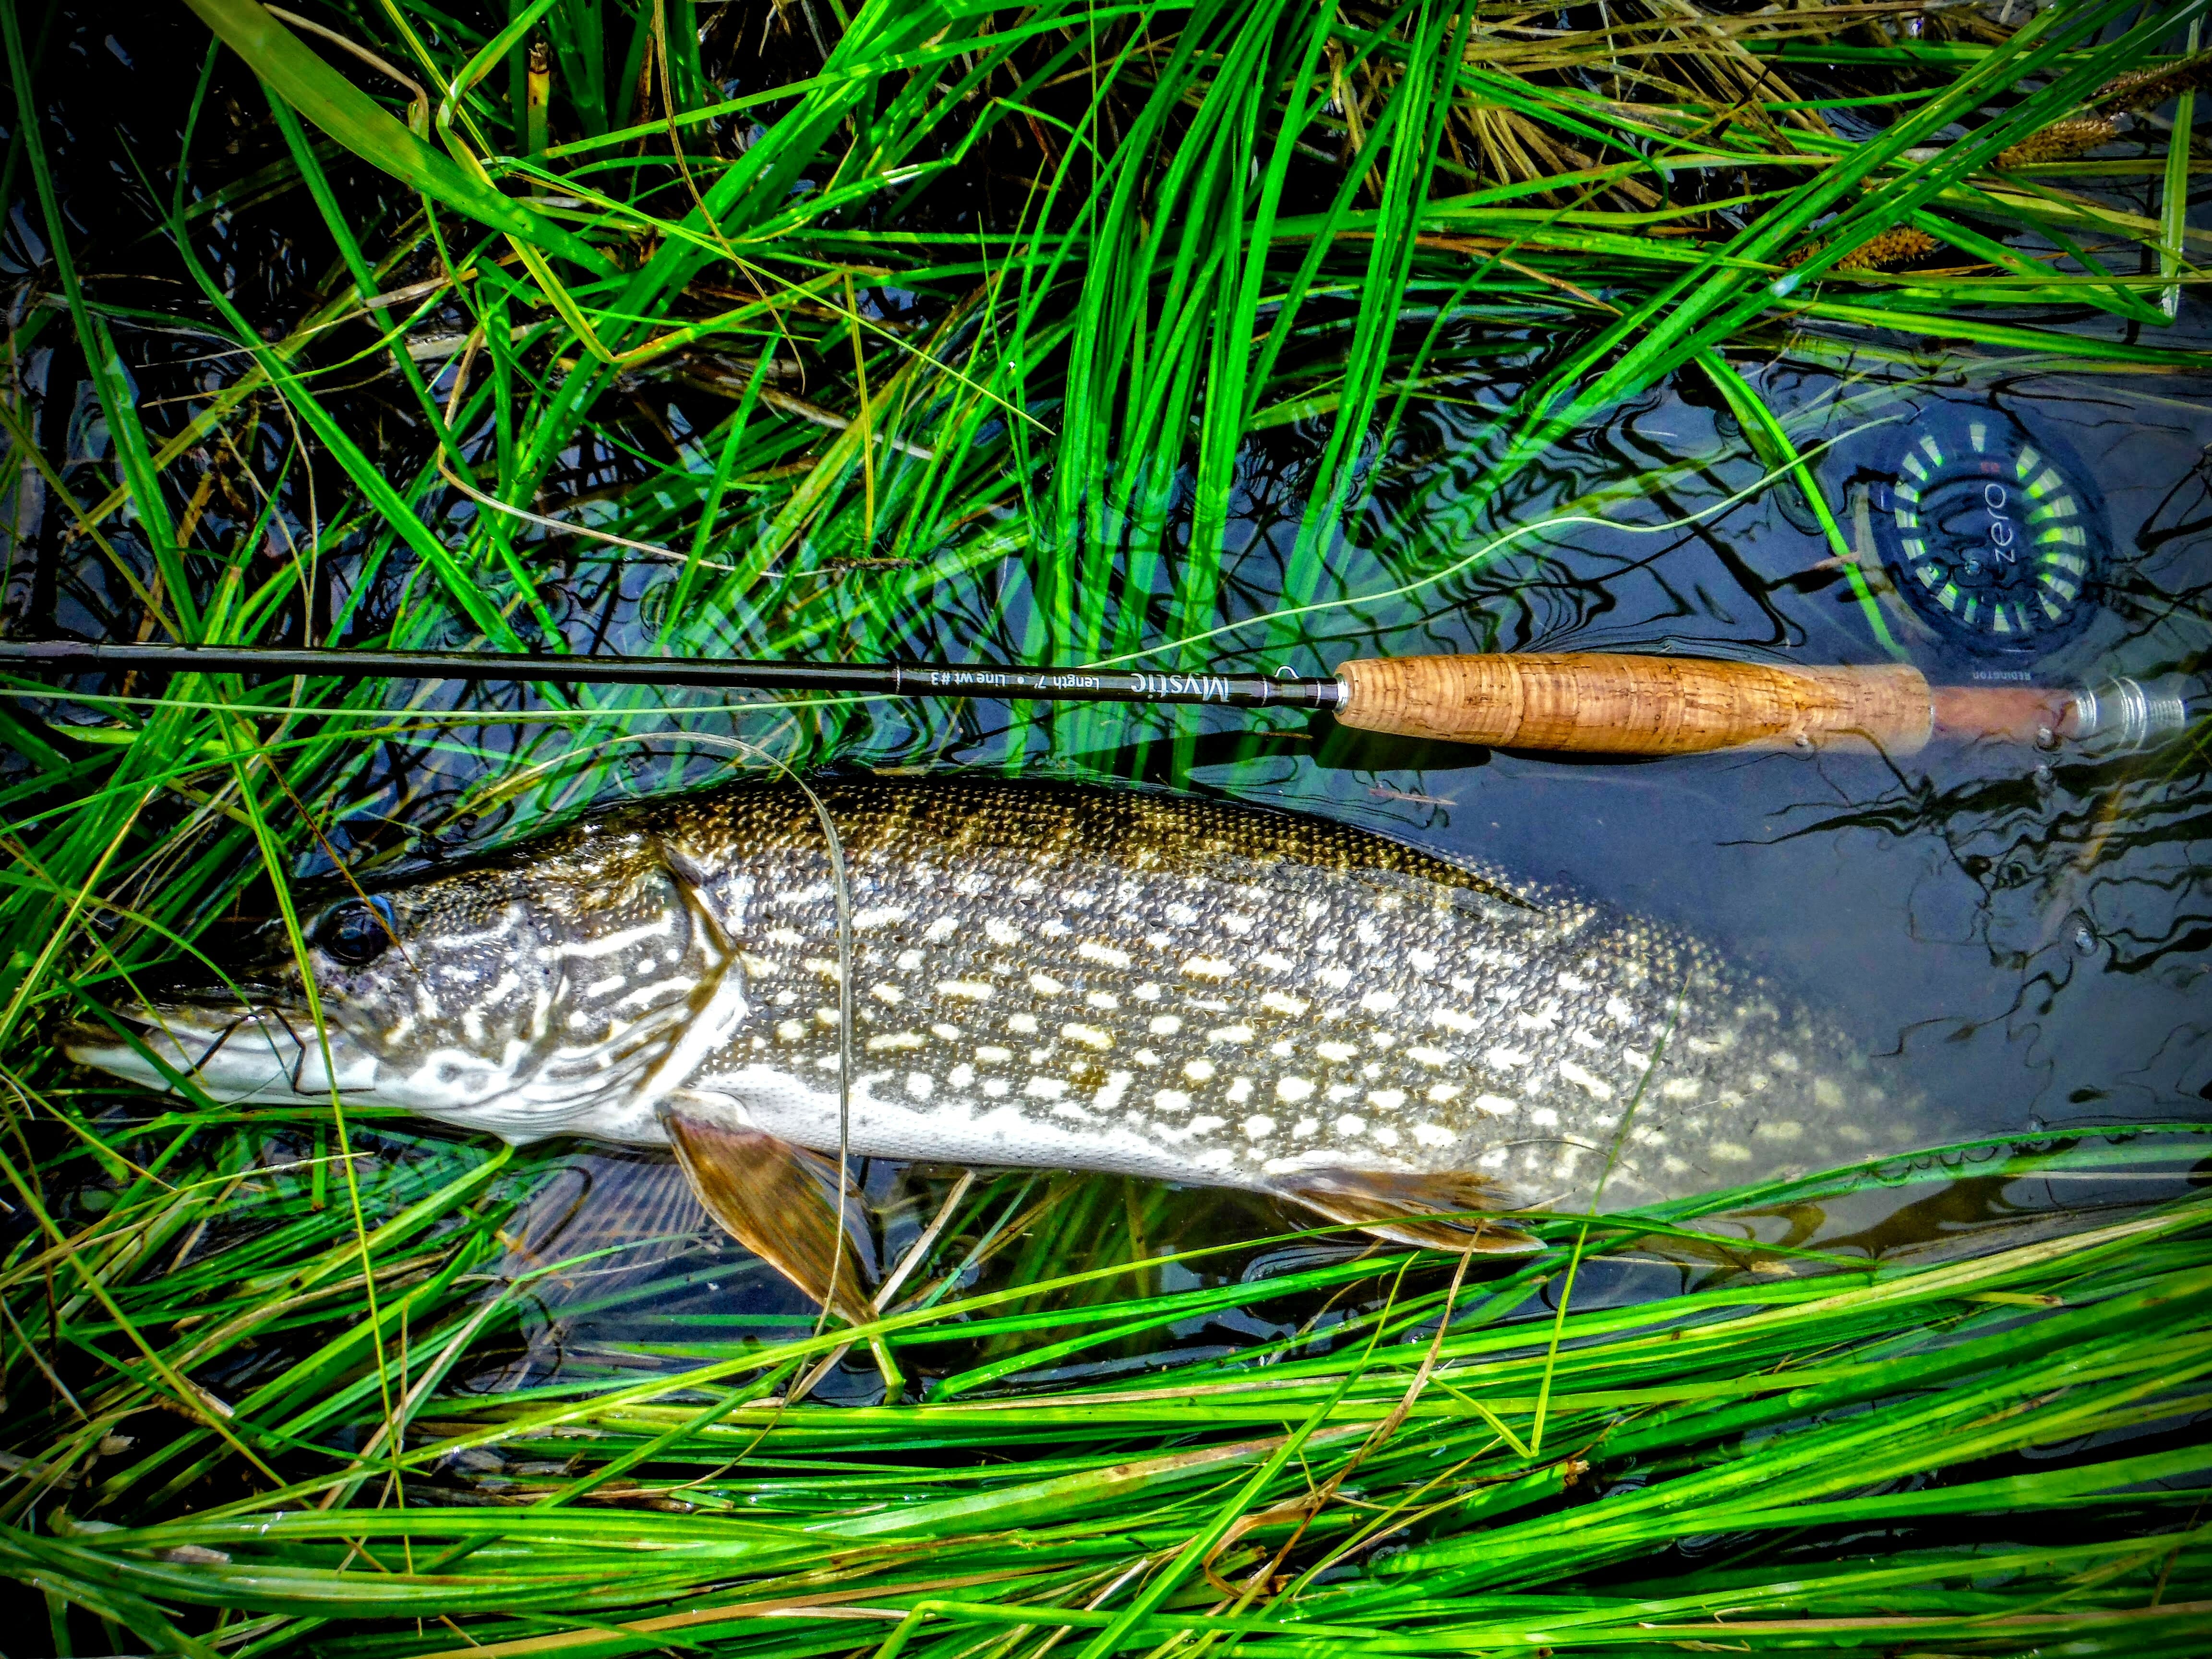 A northern pike comes to hand in an eastern Alaska boreal creek.